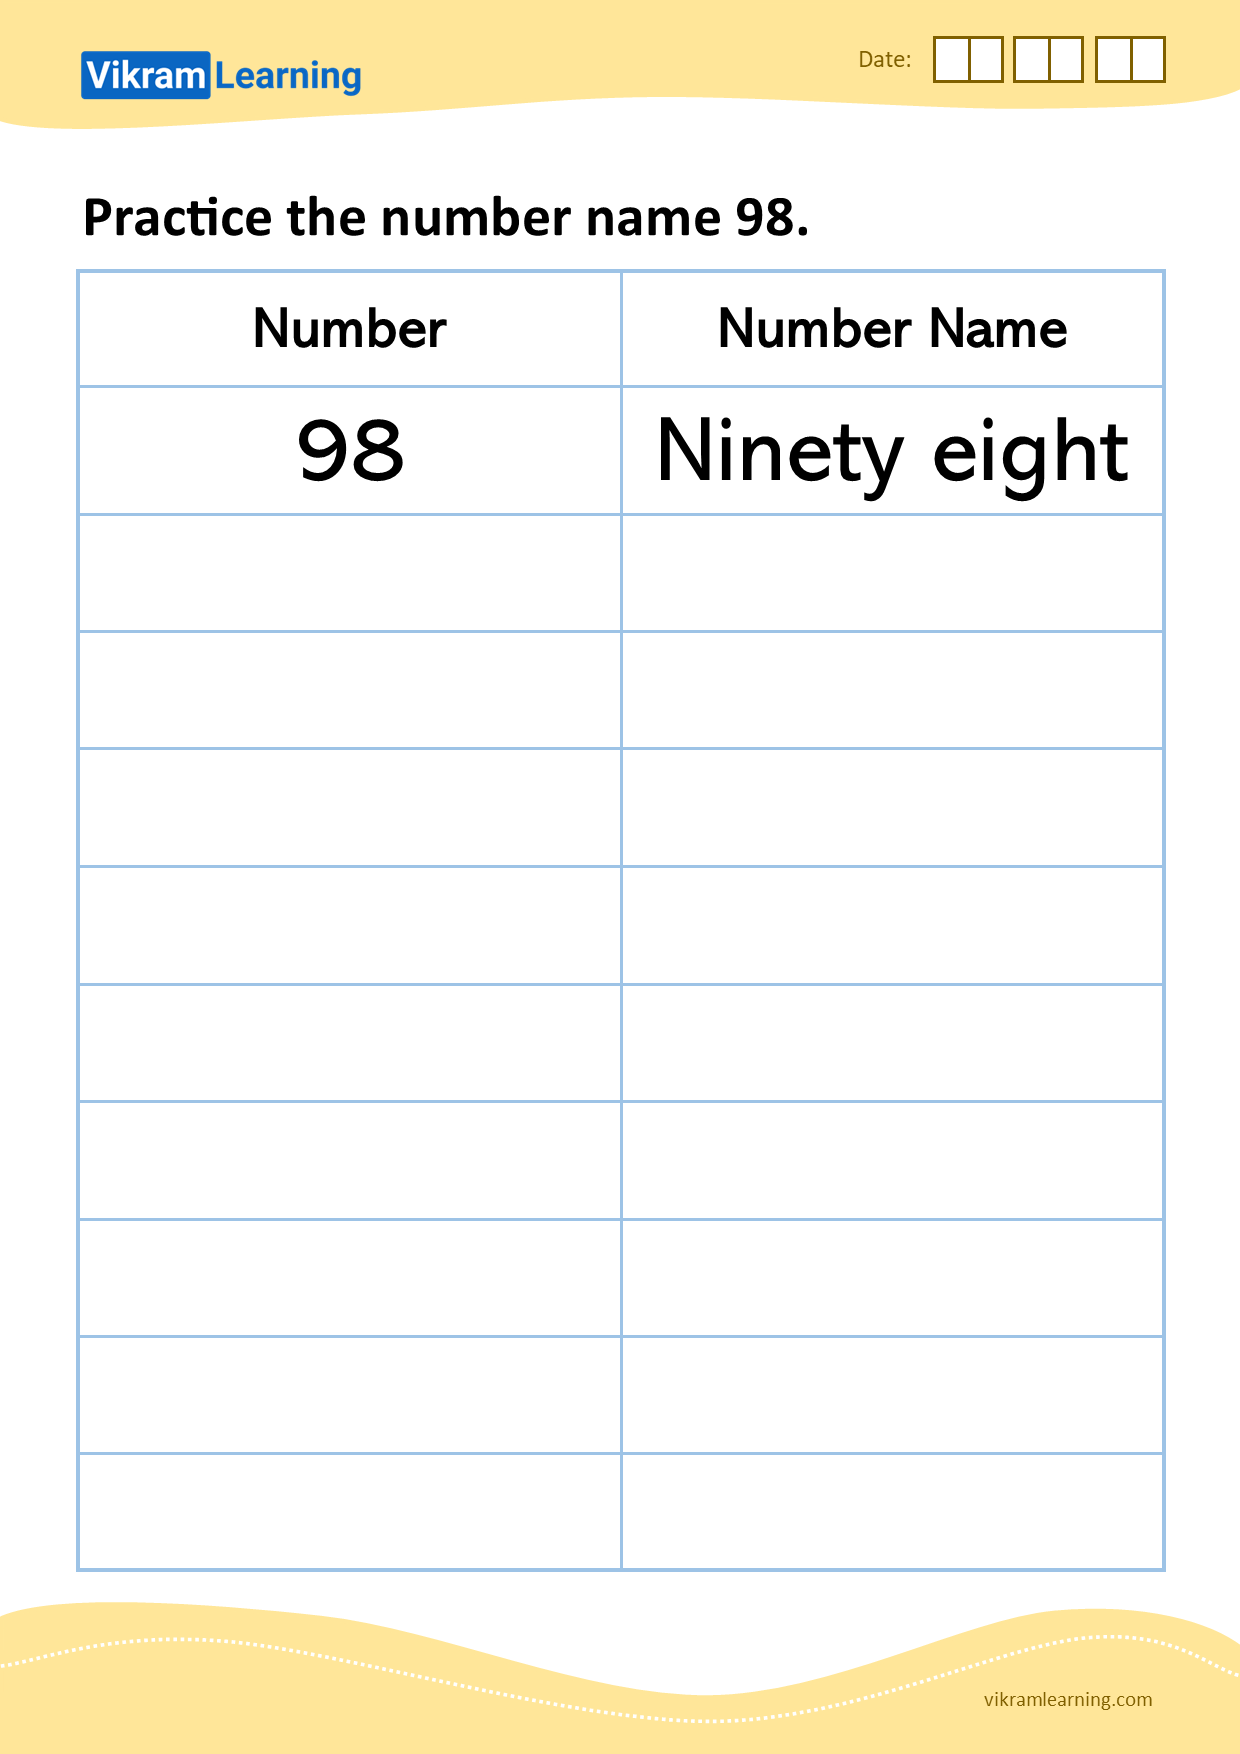 Download practice the number name 91 worksheets